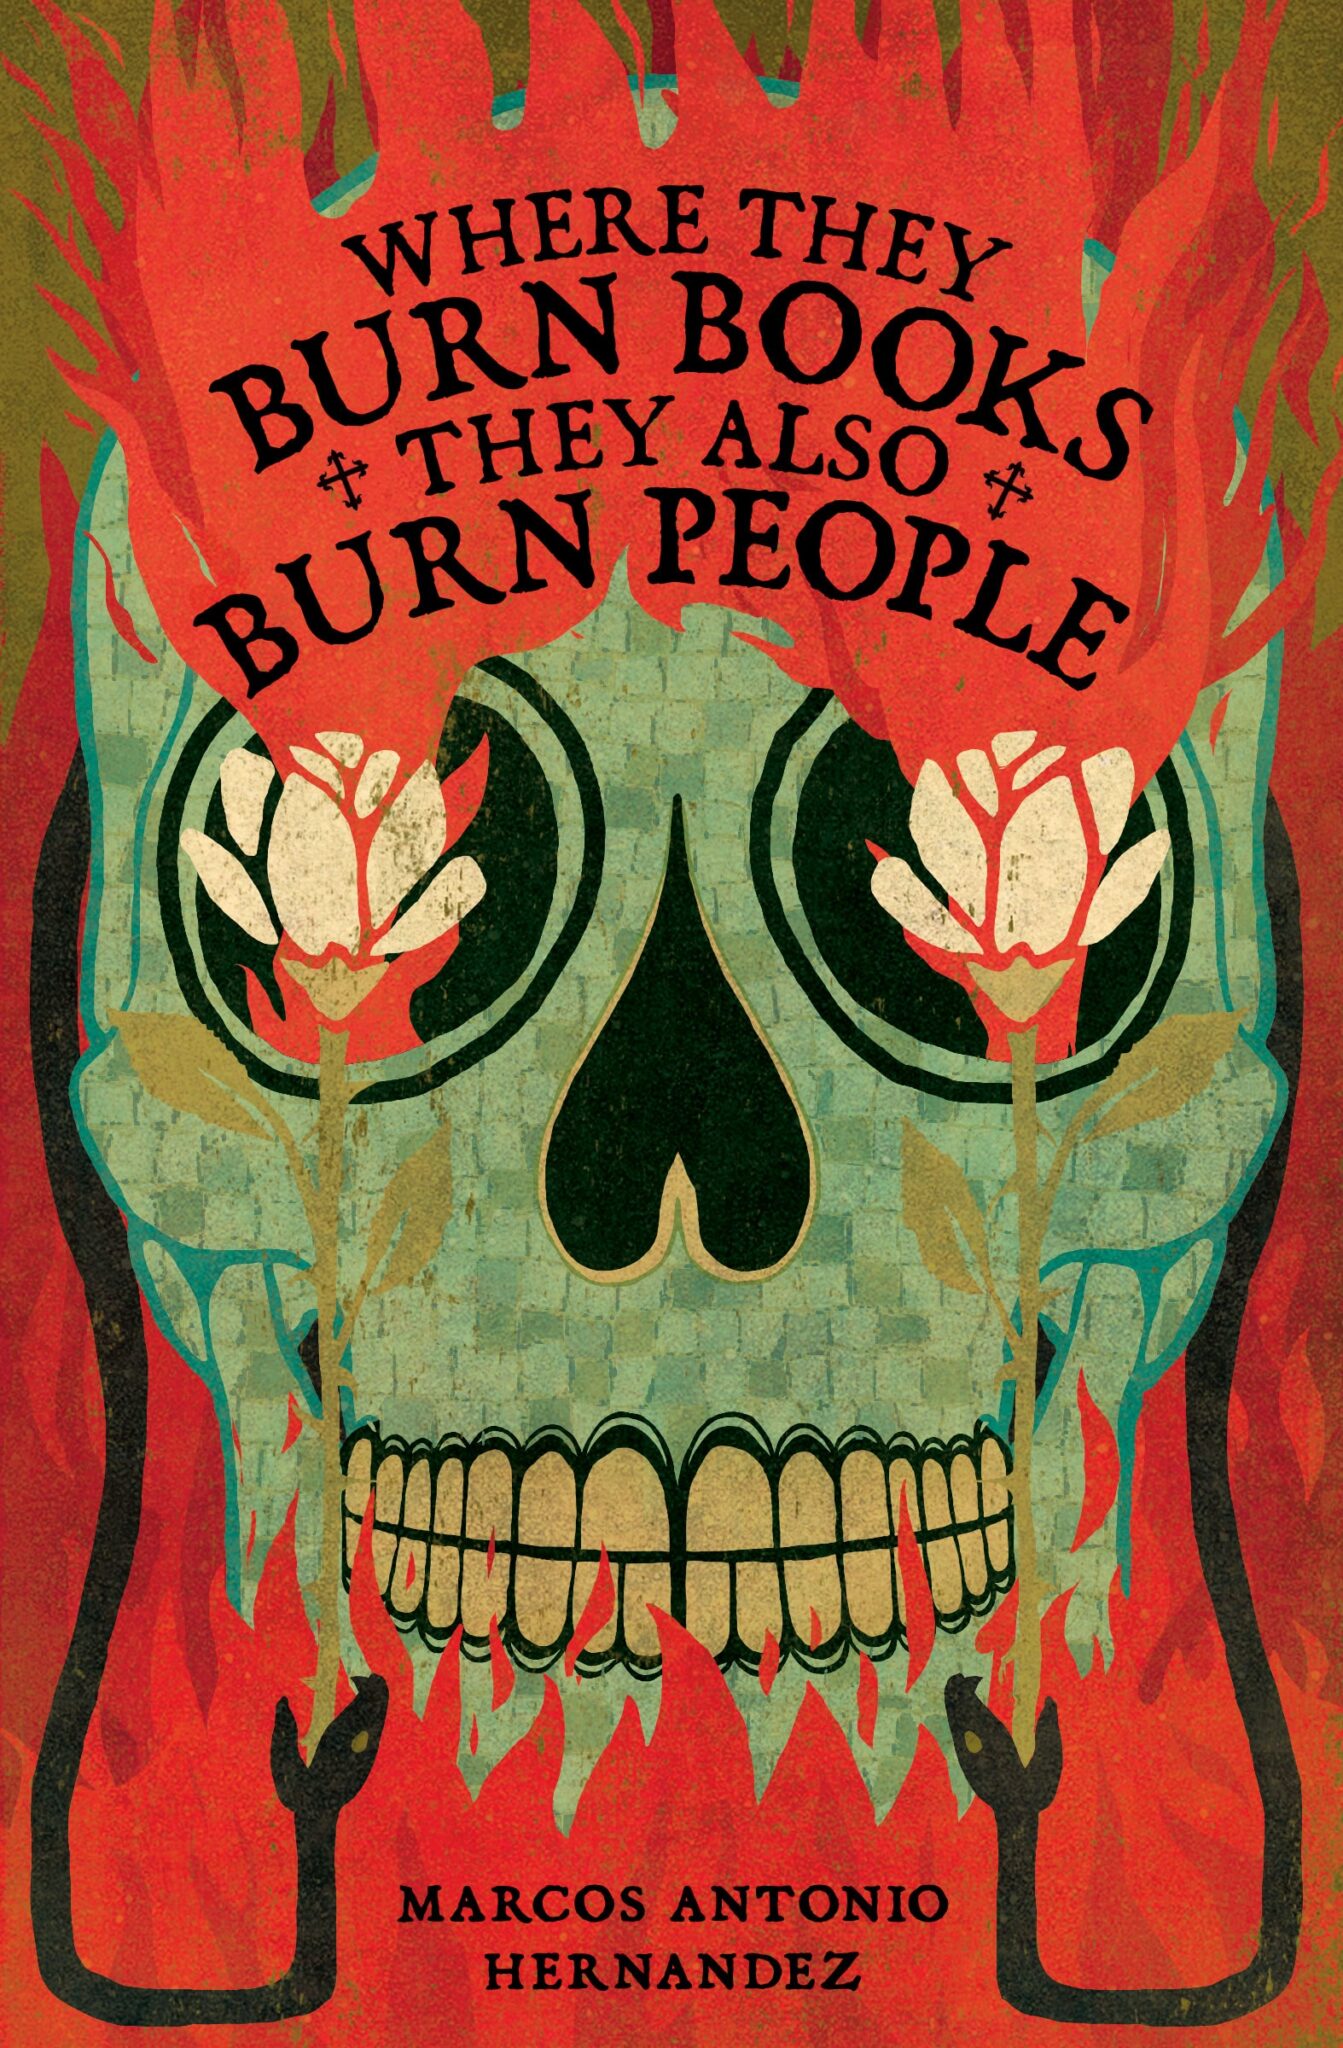 They Also Burn People cover